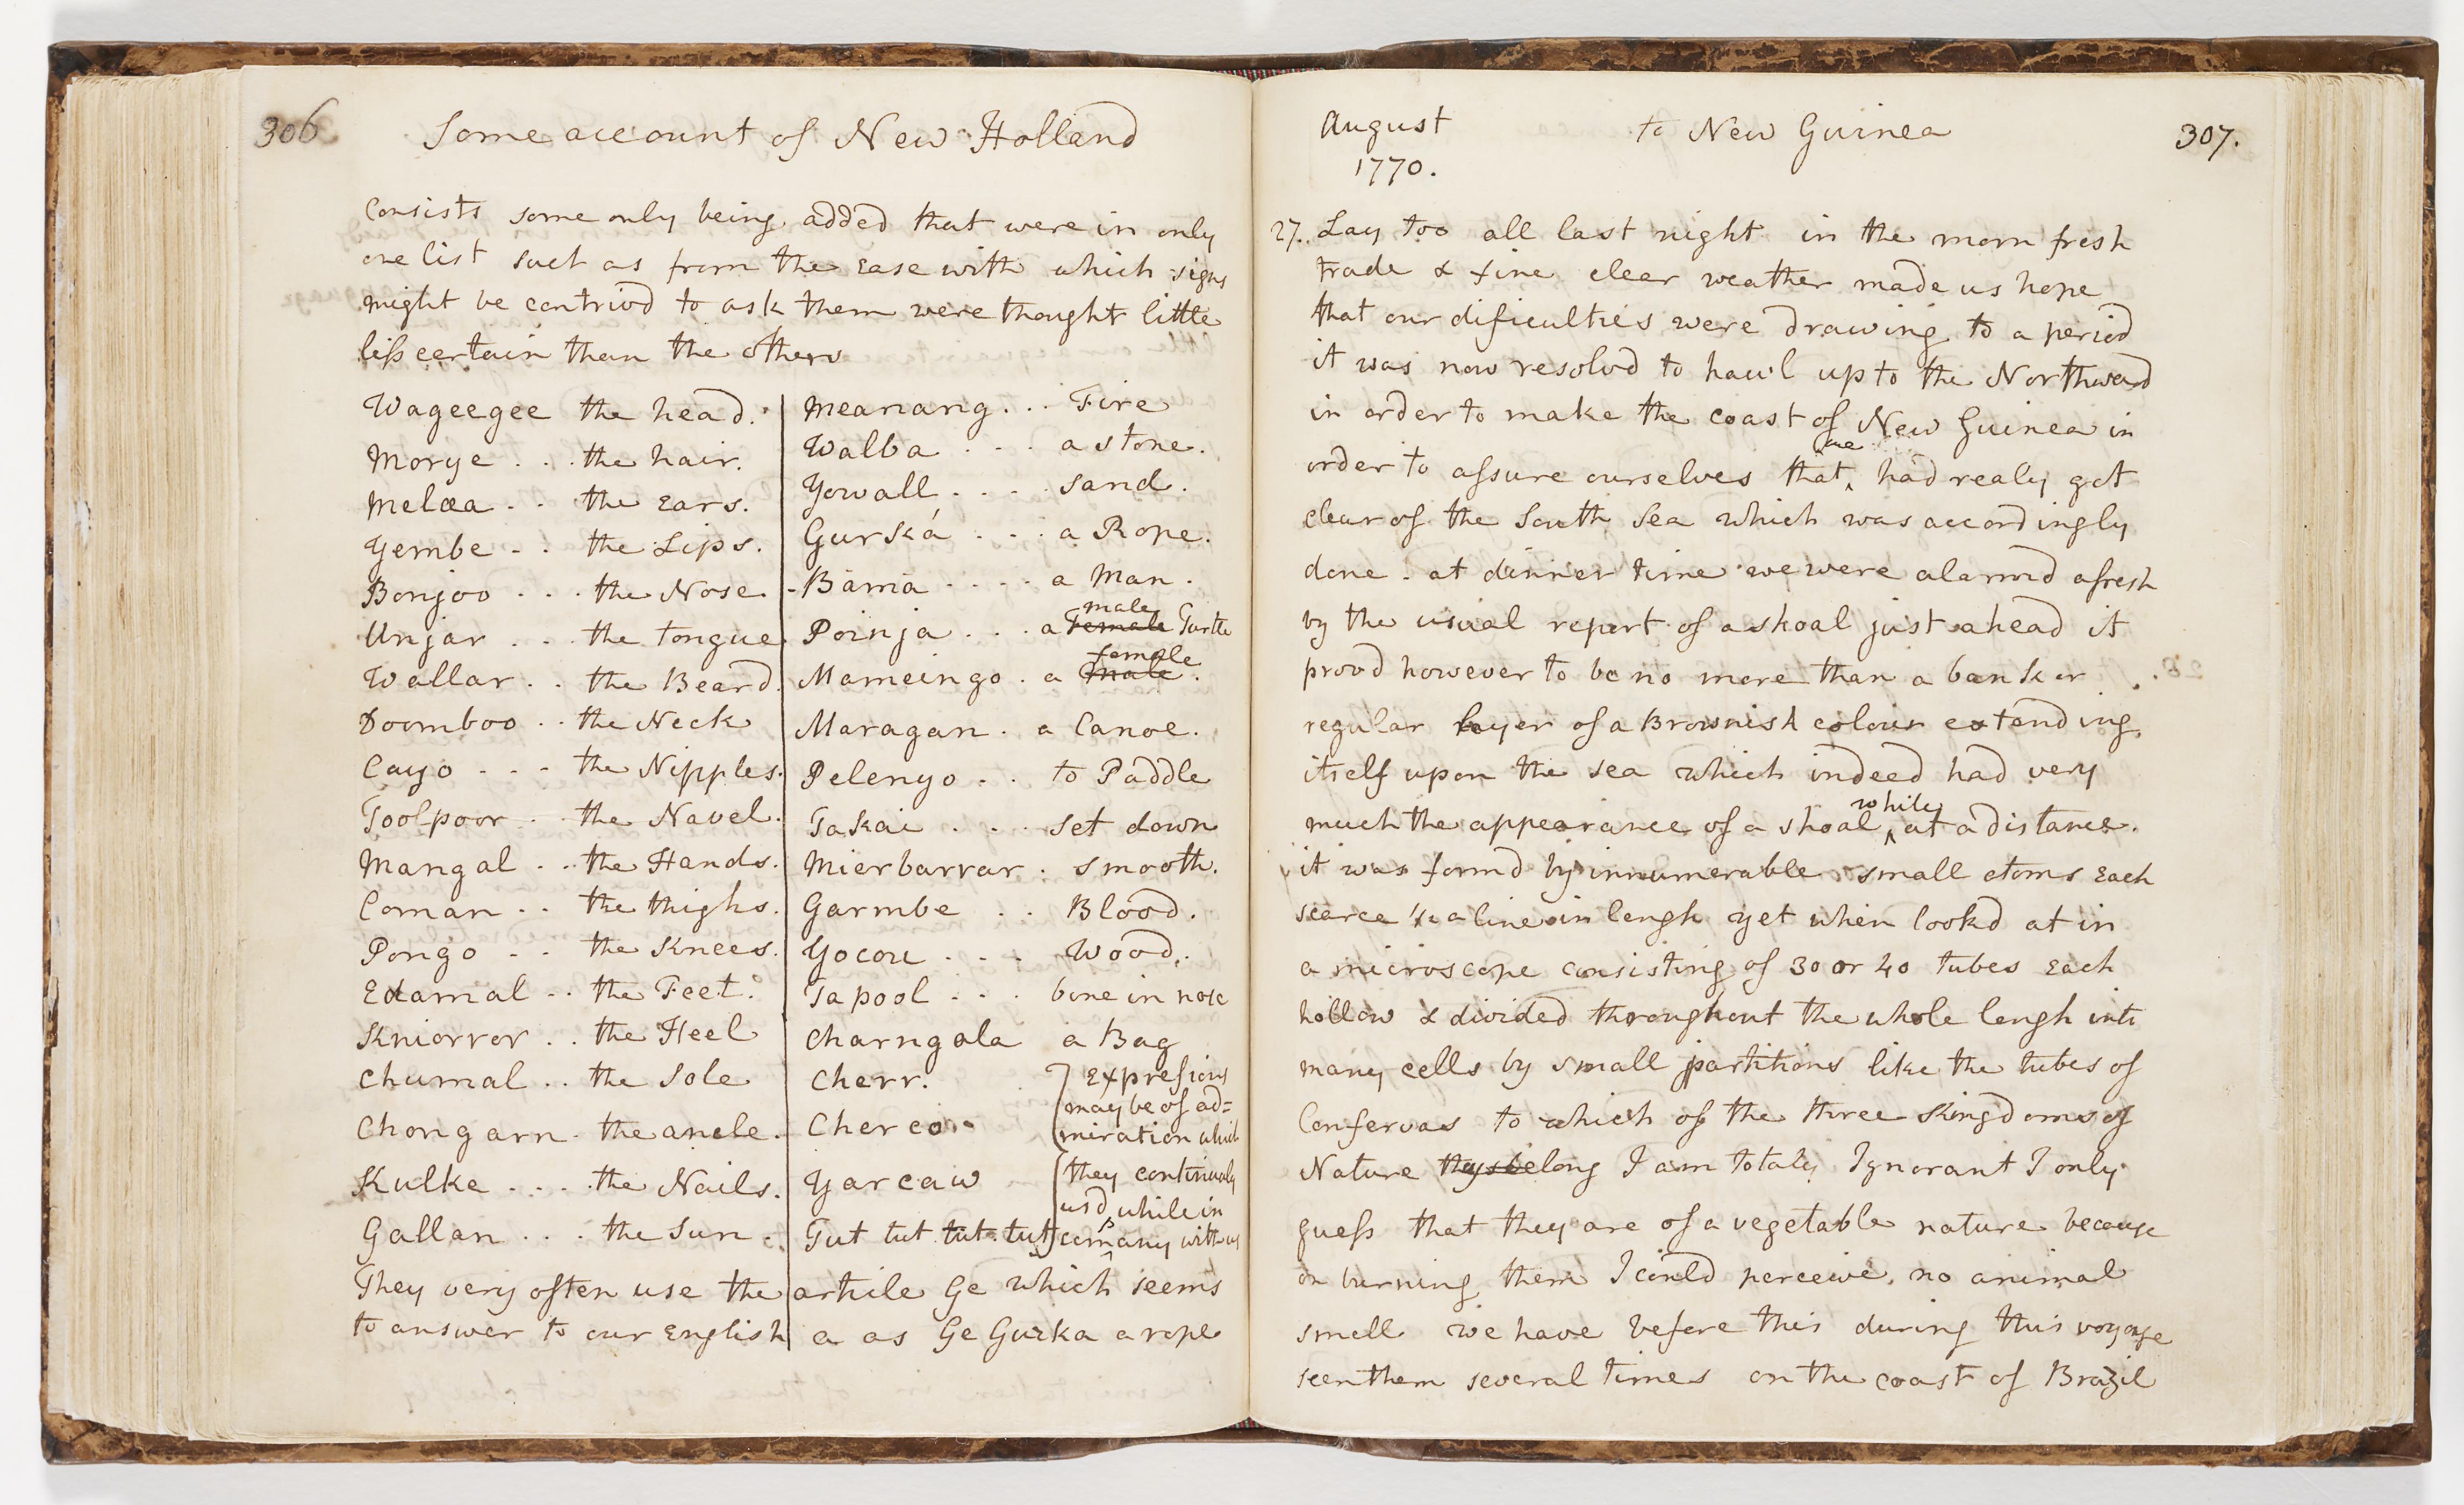 A page from Joseph Banks’ Endeavour journal, August 1770.